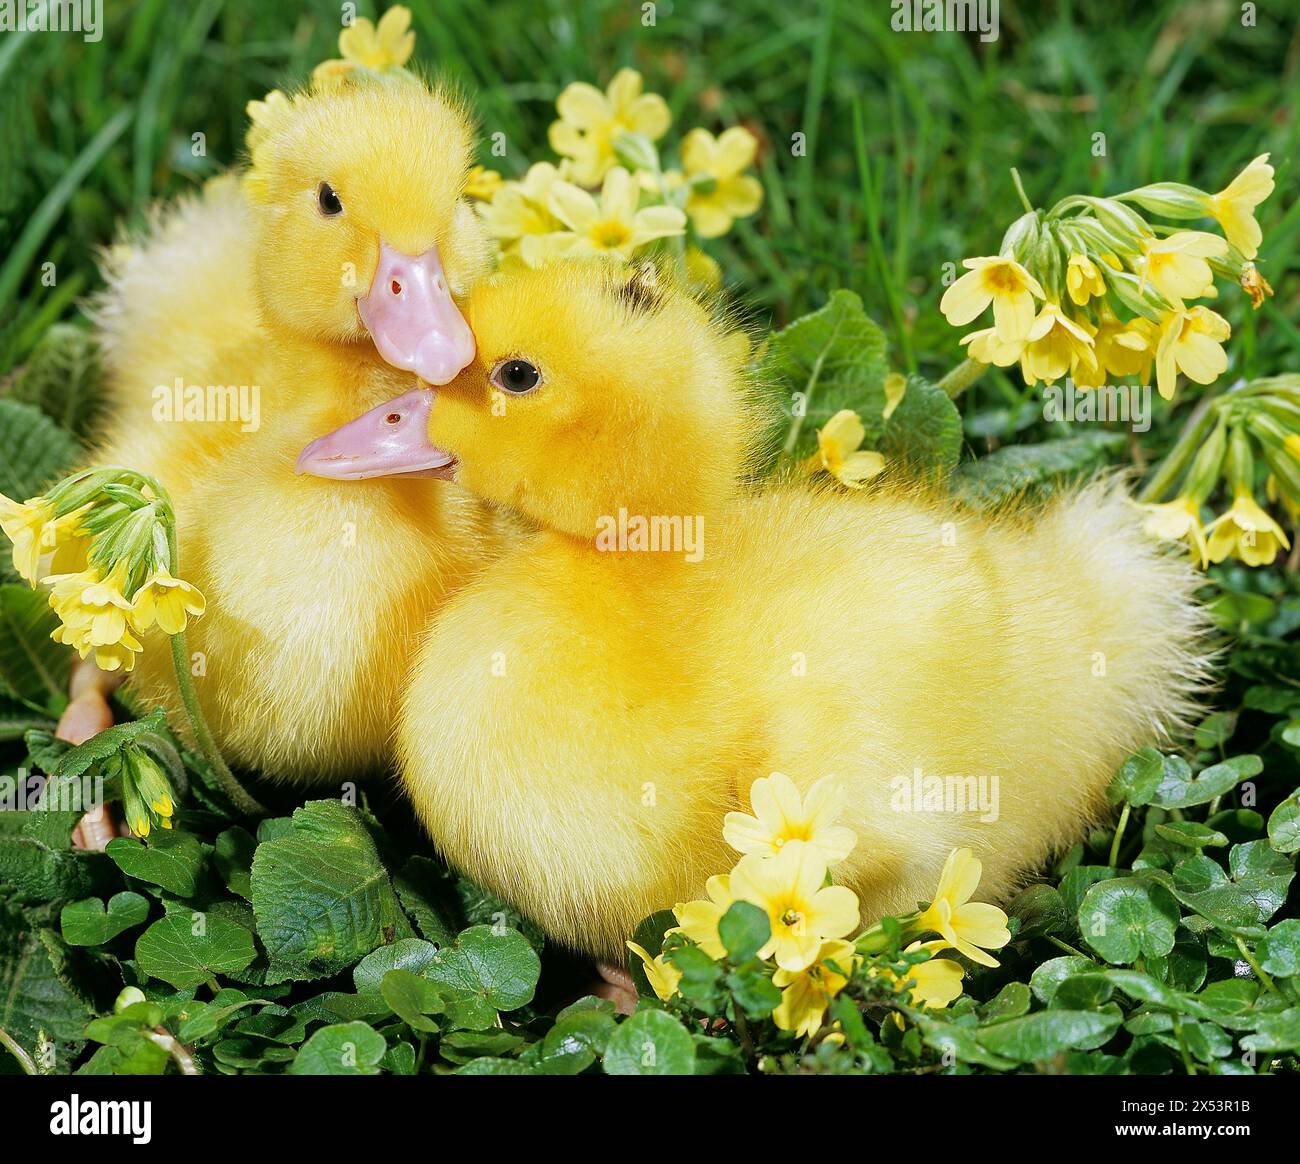 Ducklings outdoors in meadow with oxlips. South Germany Stock Photo